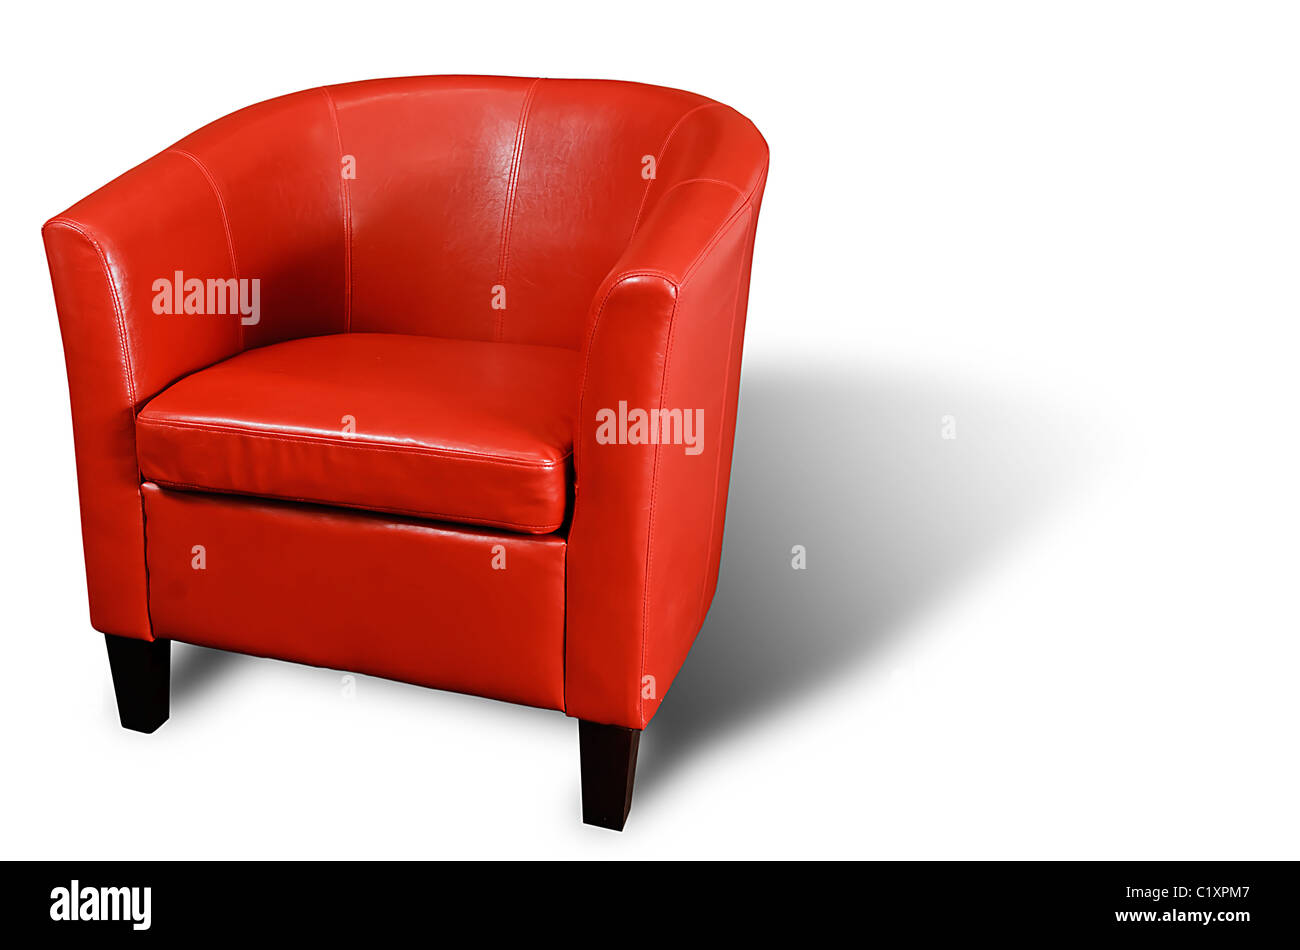 Bright Red leather Armchair isolated on white with a drop shadow. Stock Photo